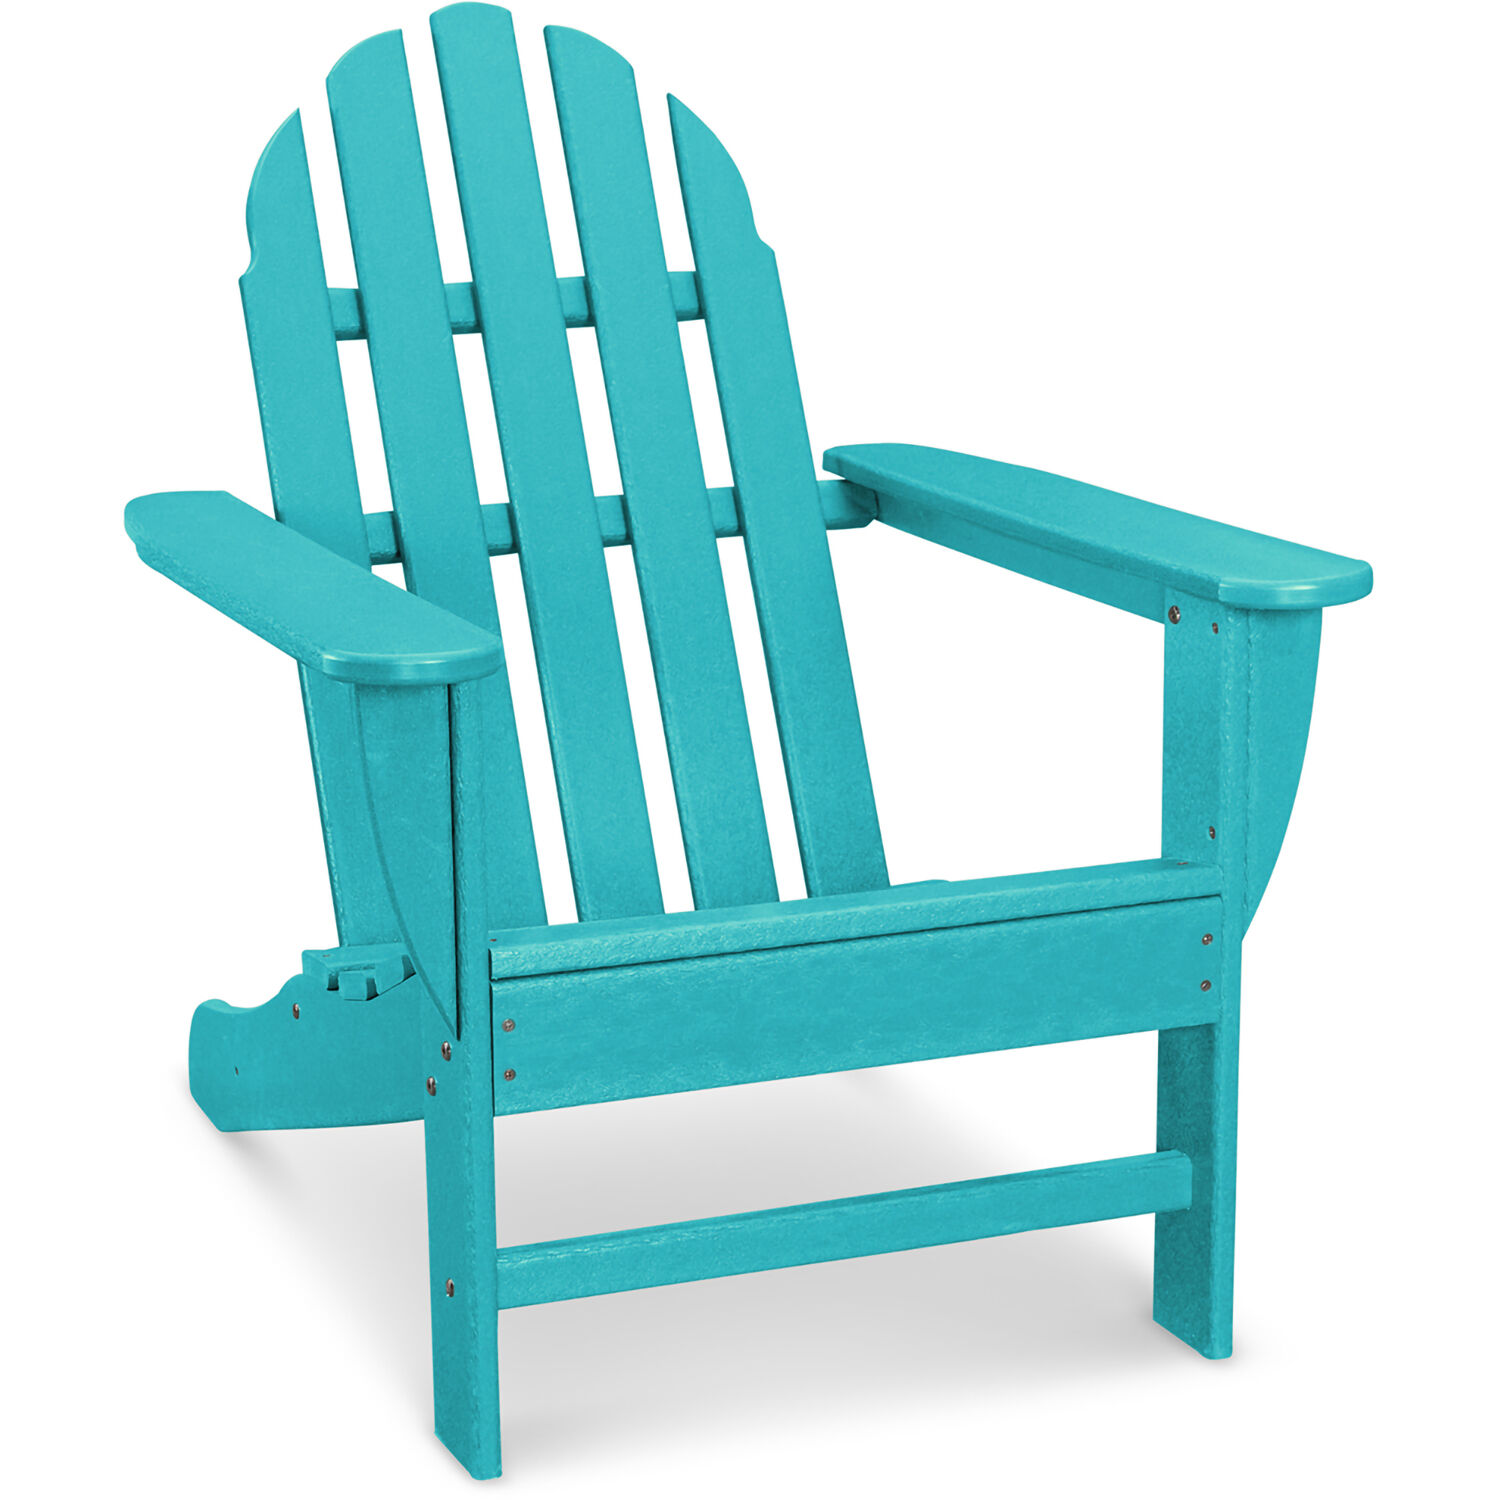 Hanover Classic All-Weather Adirondack Chair in Aruba Blue - image 1 of 2